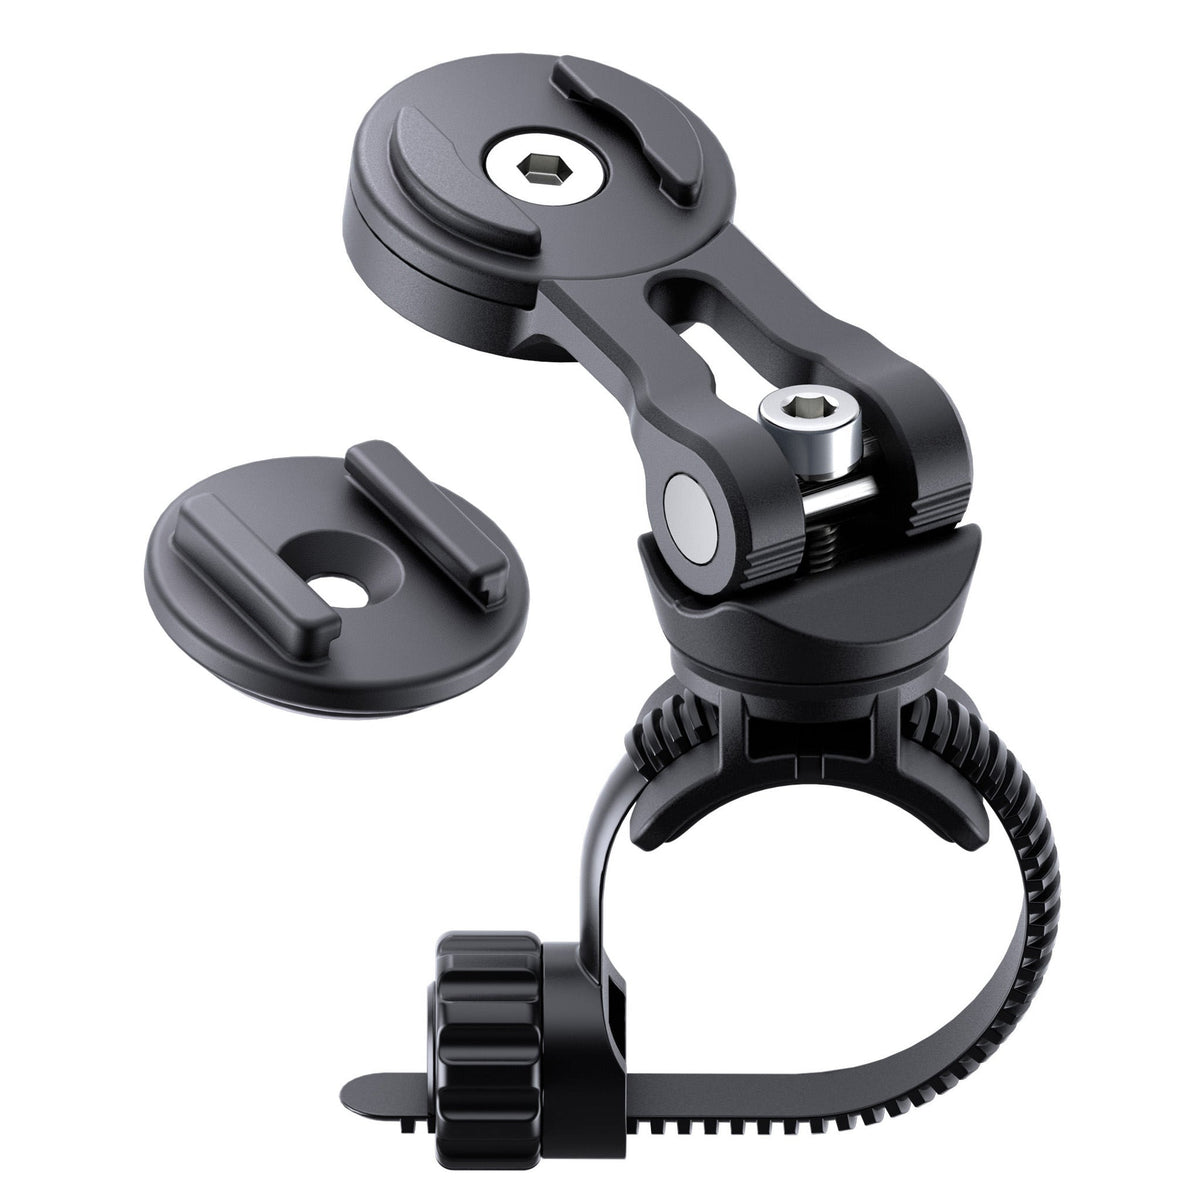 SP Connect Motorcycle phone mount installation and review 